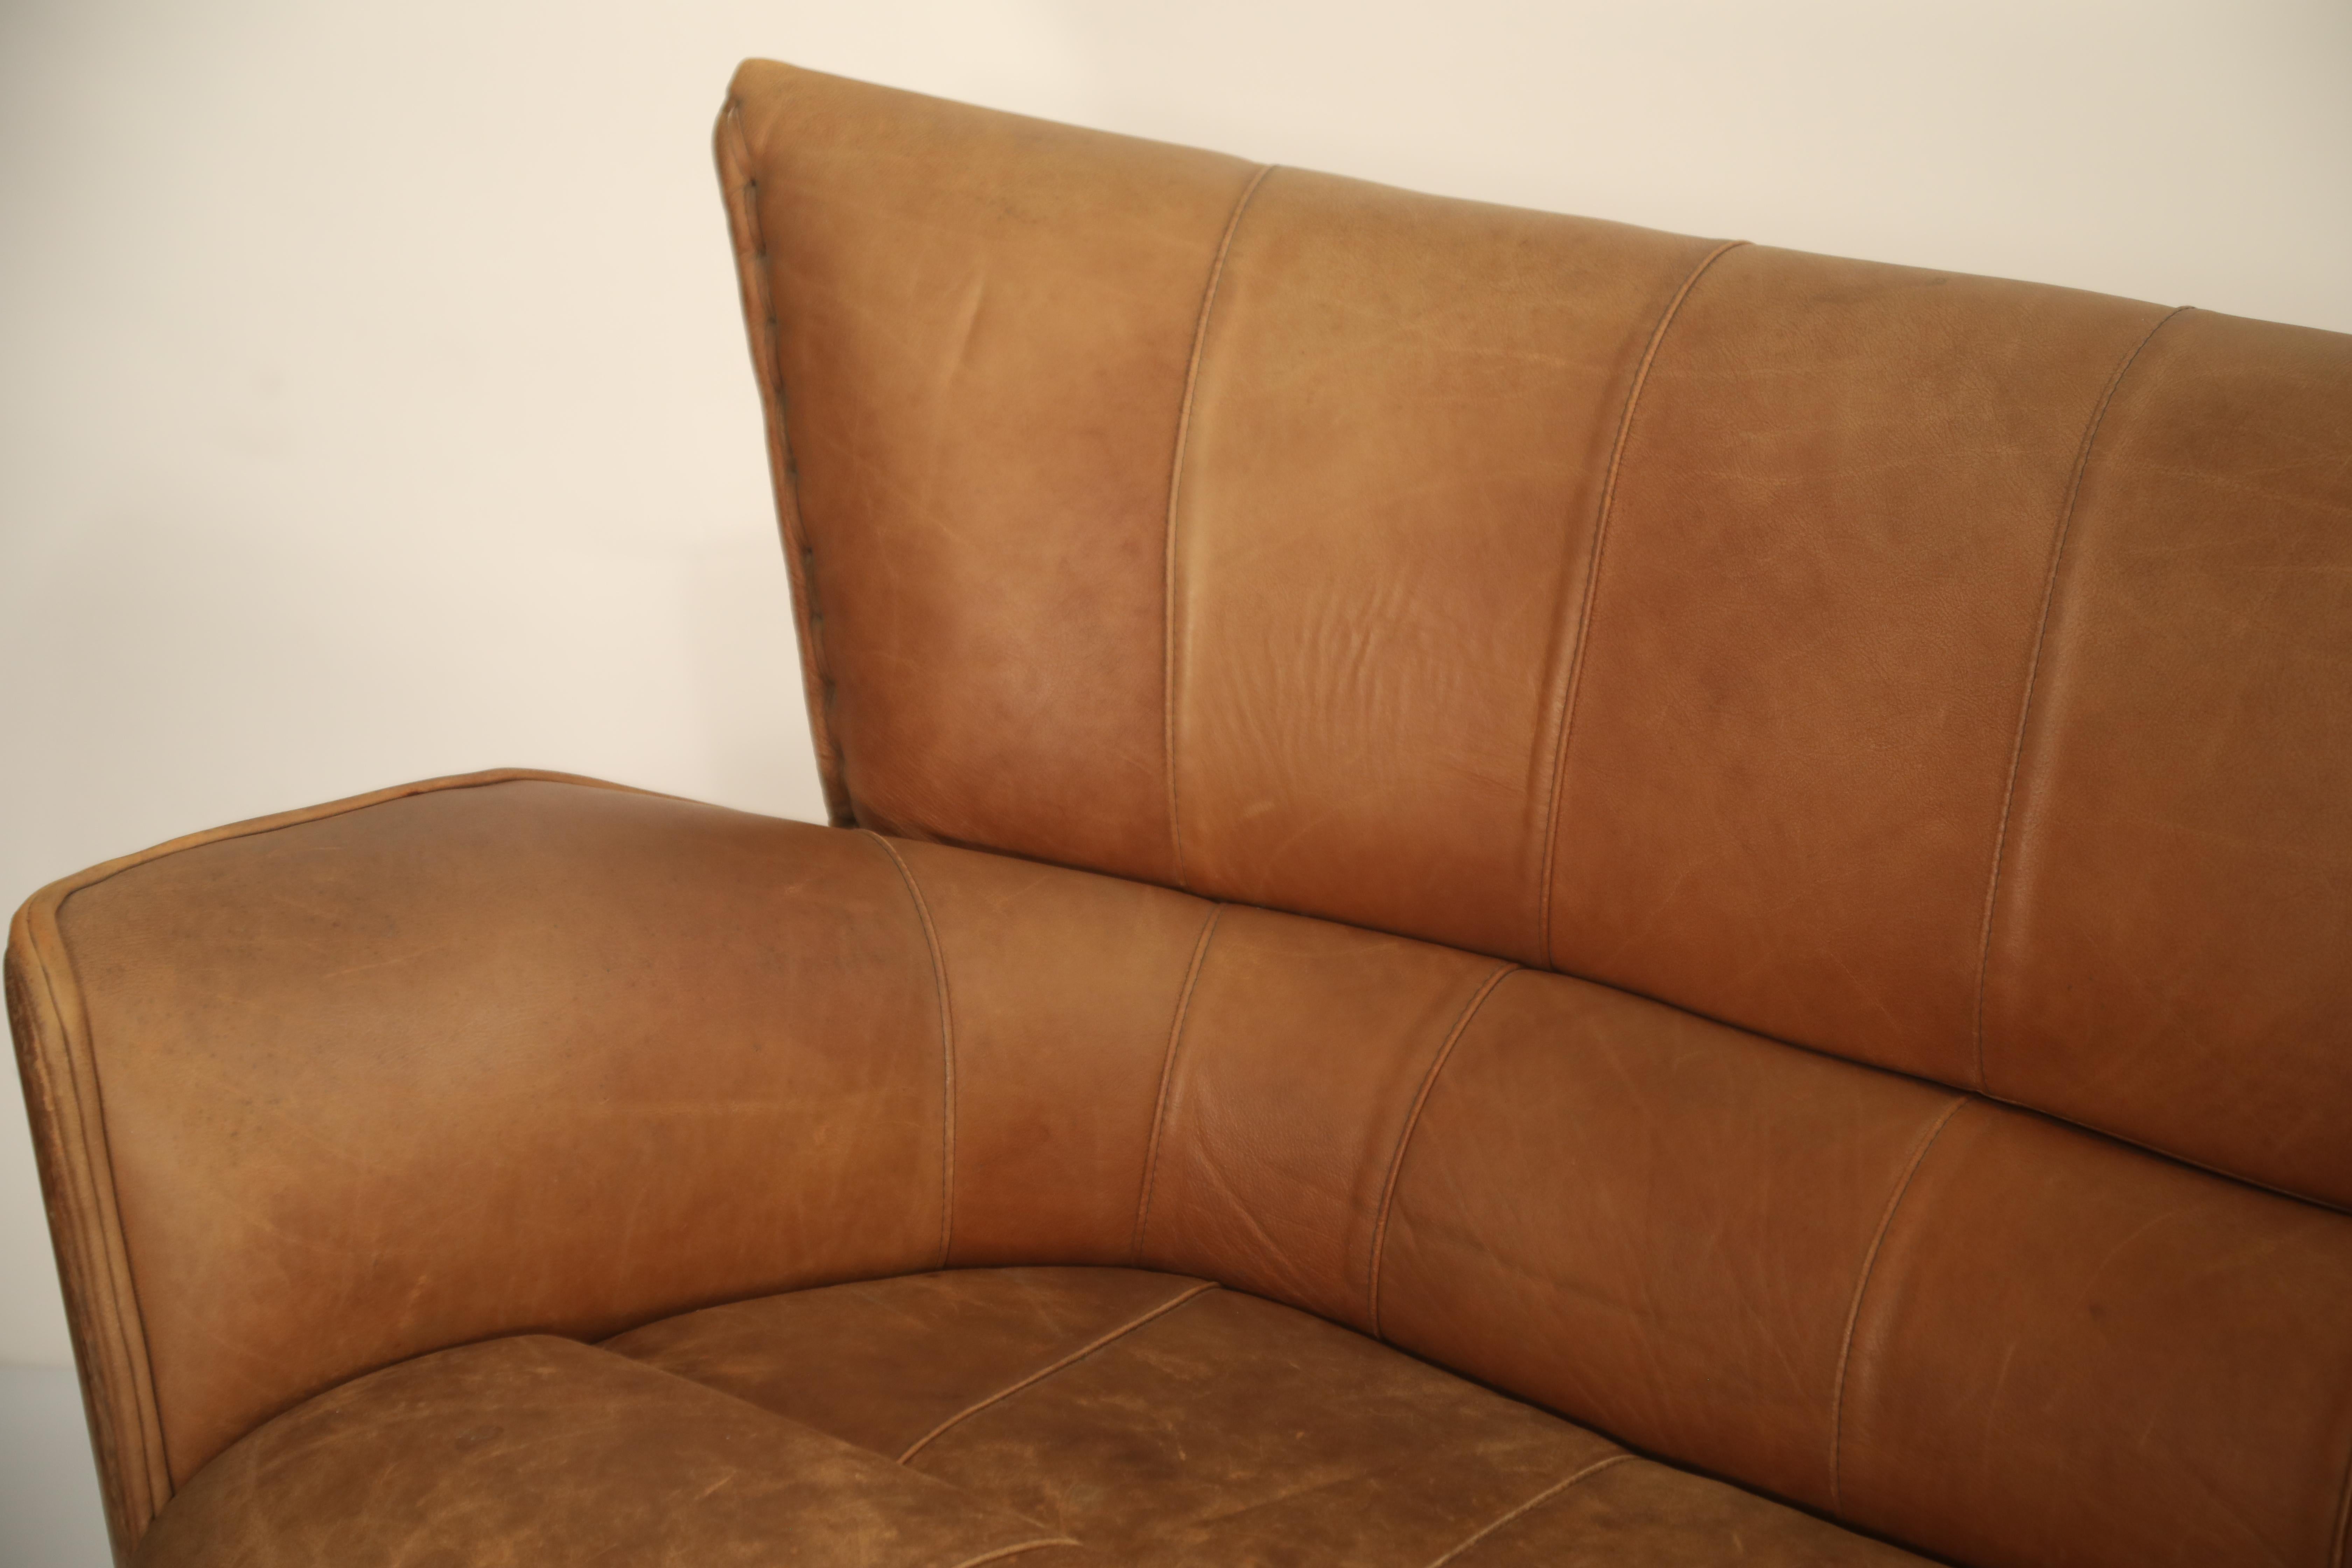 Australian Leather and Palmwood Sofa by Pacific Green, circa 1980